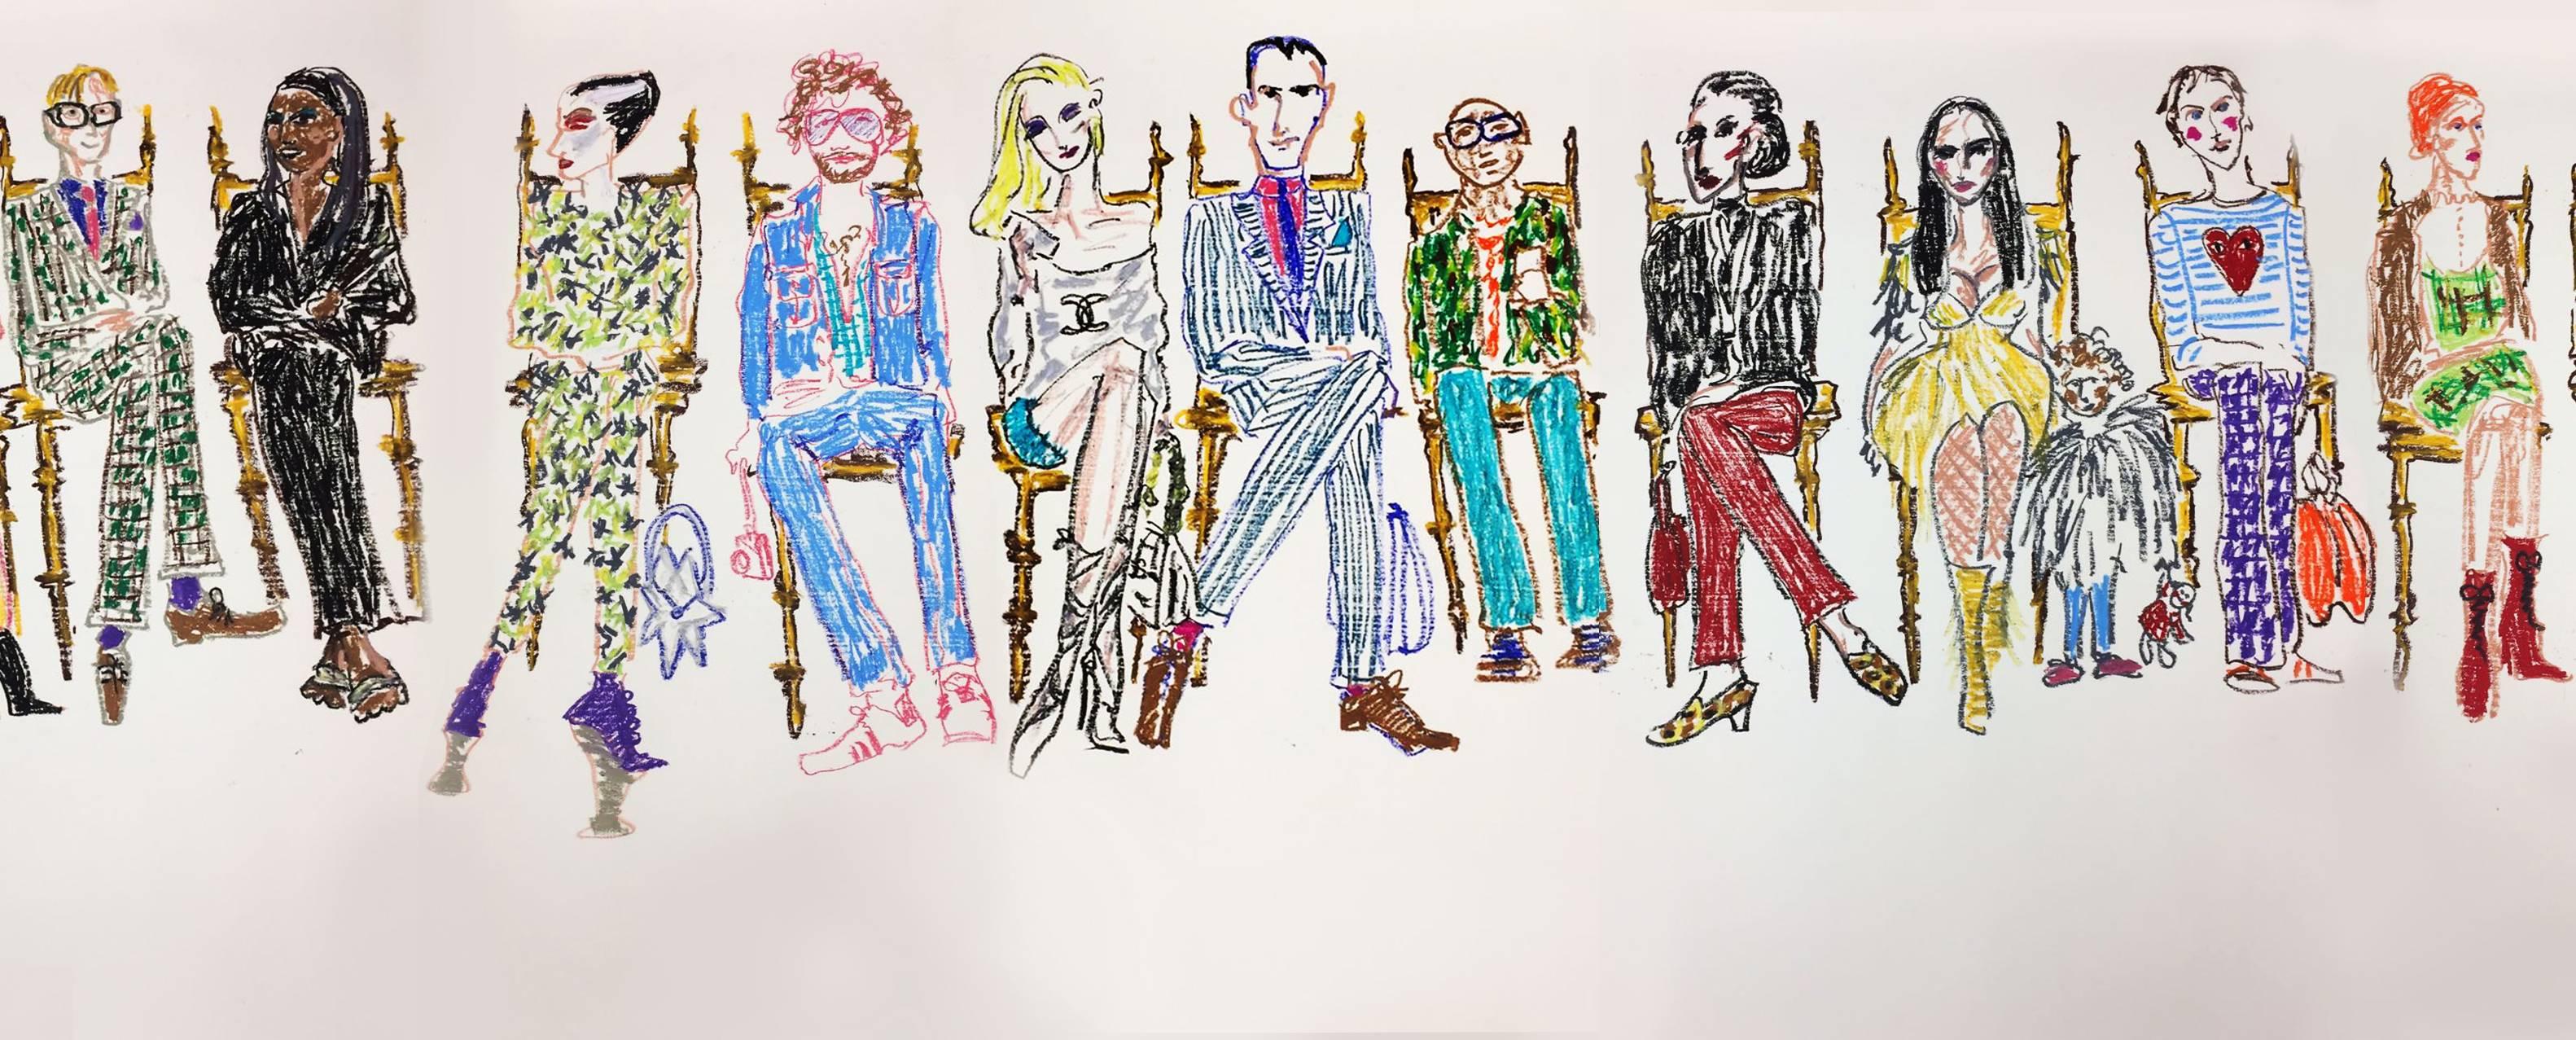 Manuel Santelices Figurative Art - Front Row 2, one of a kind oil pastel fashion illustration